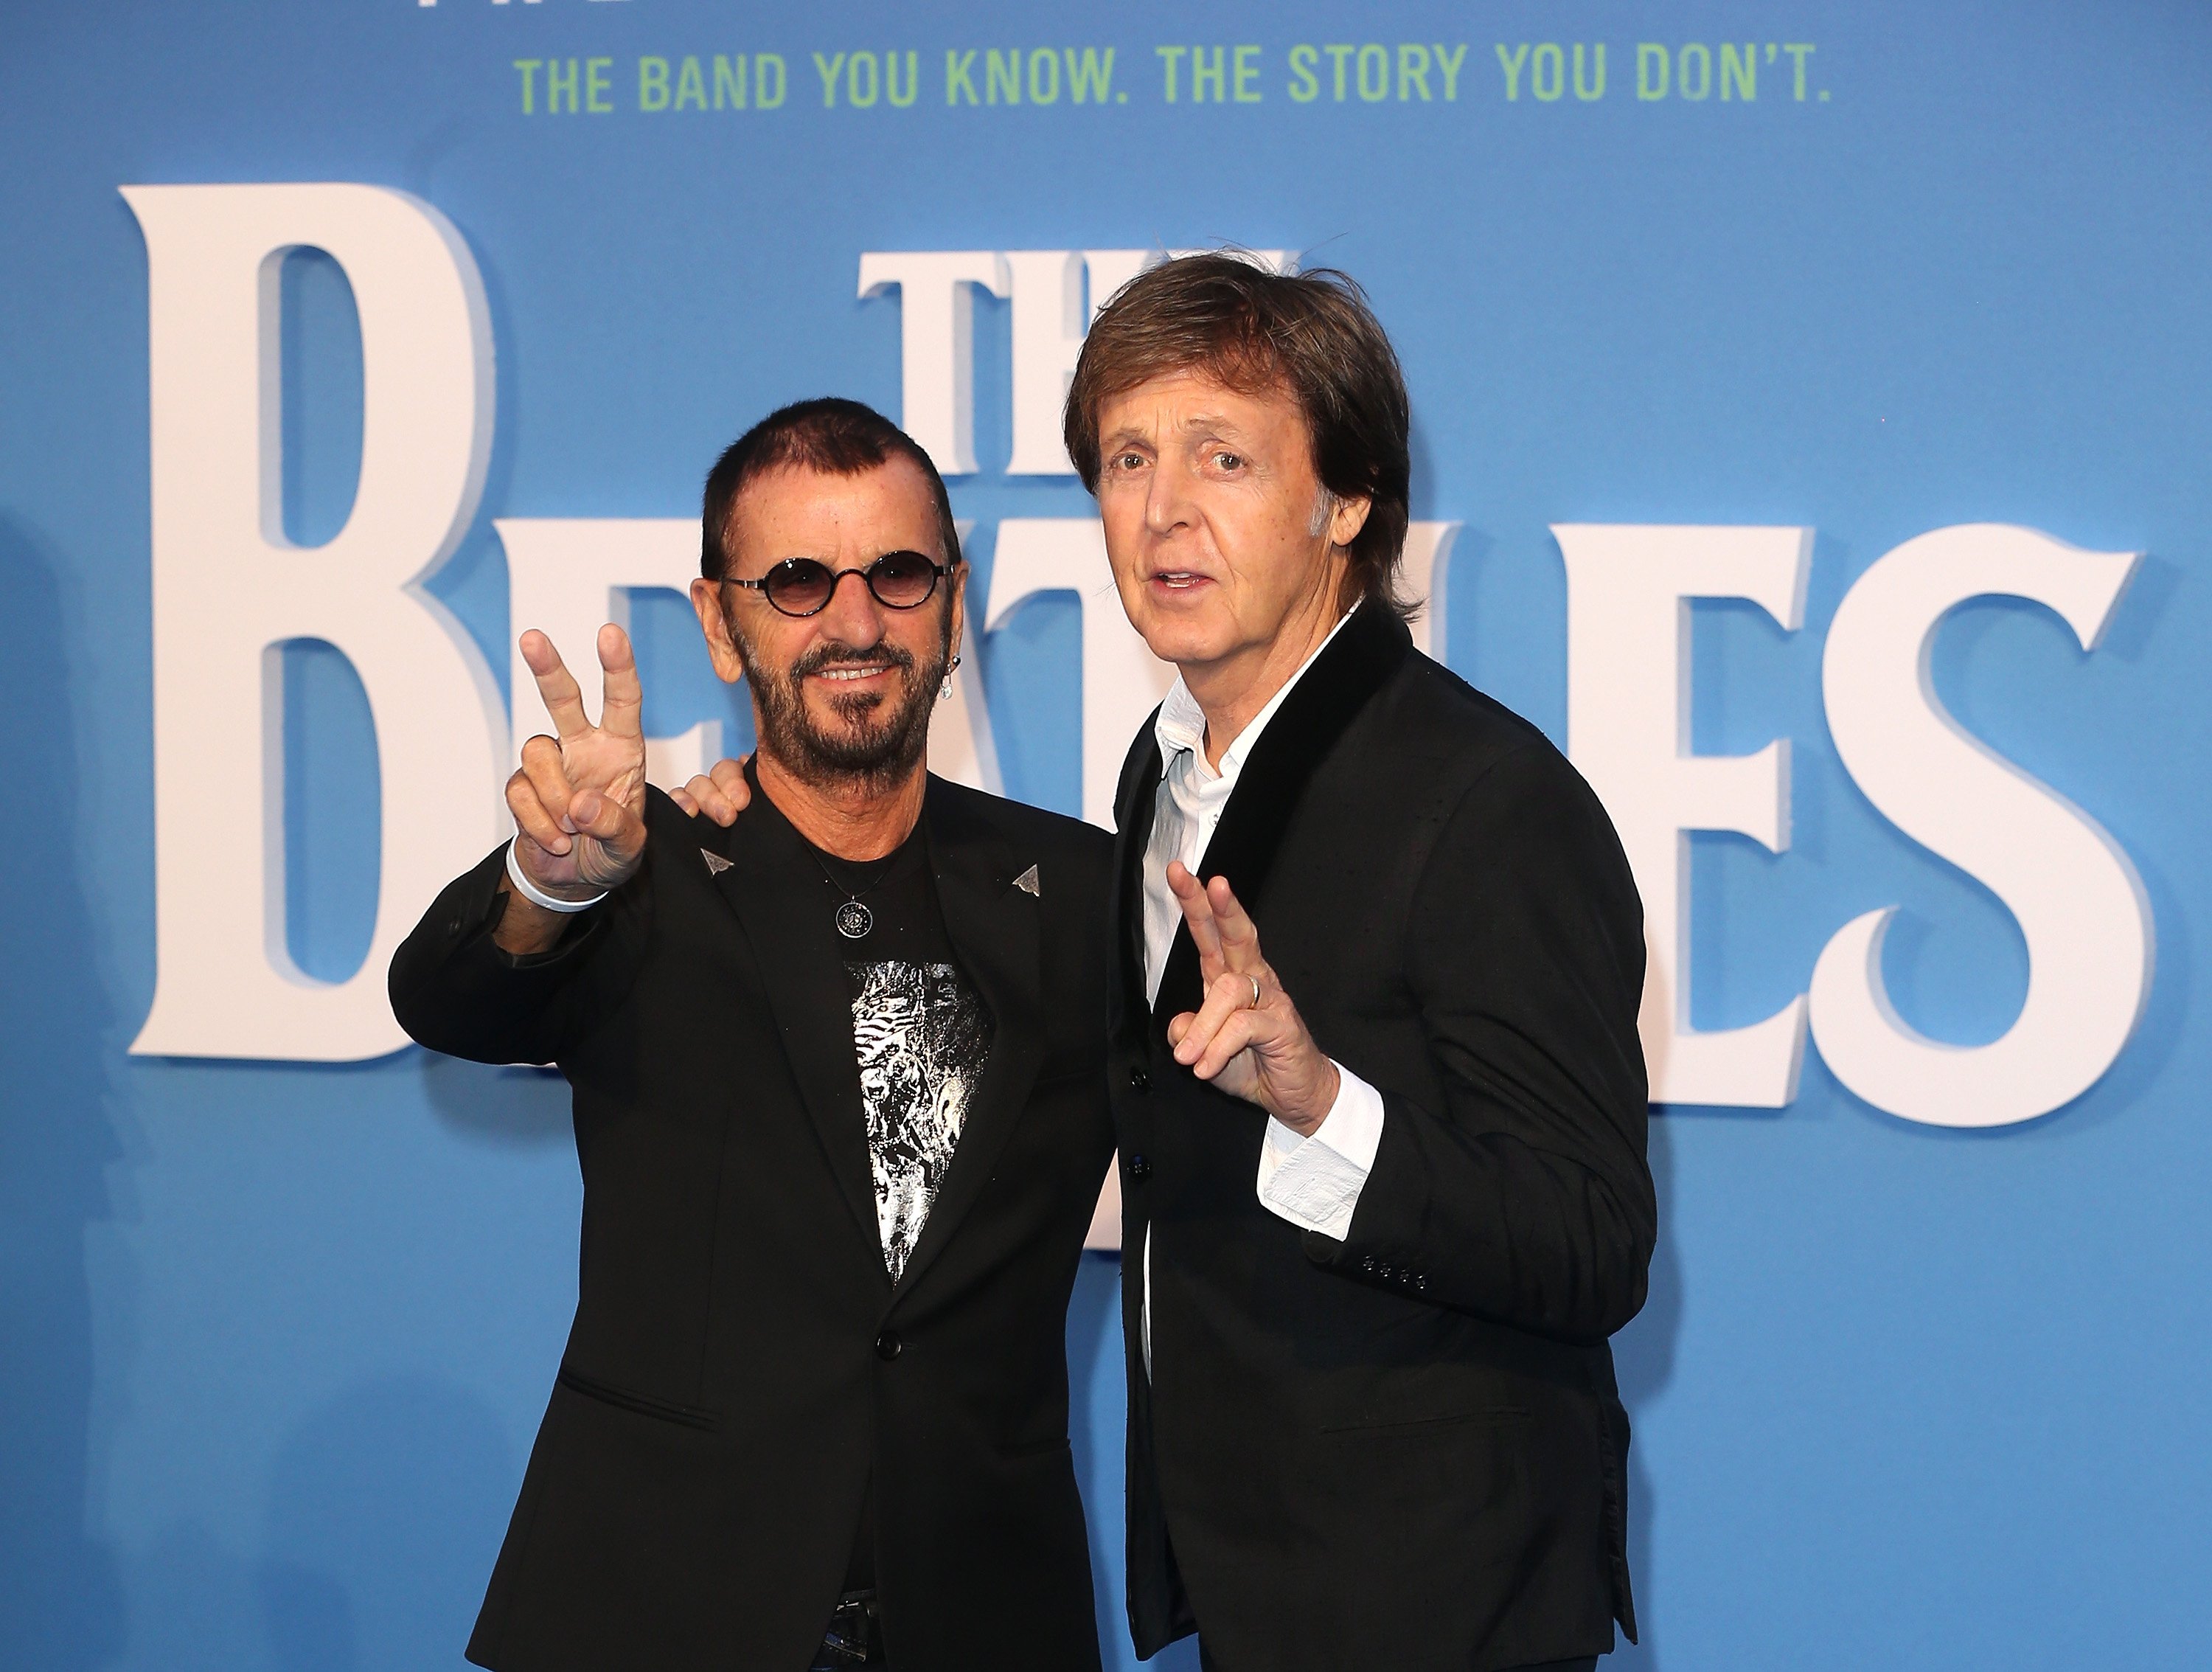 Ringo Starr and Paul McCartney of The Beatles attend the world premiere of The Beatles: Eight Days A Week - The Touring Years in London, England